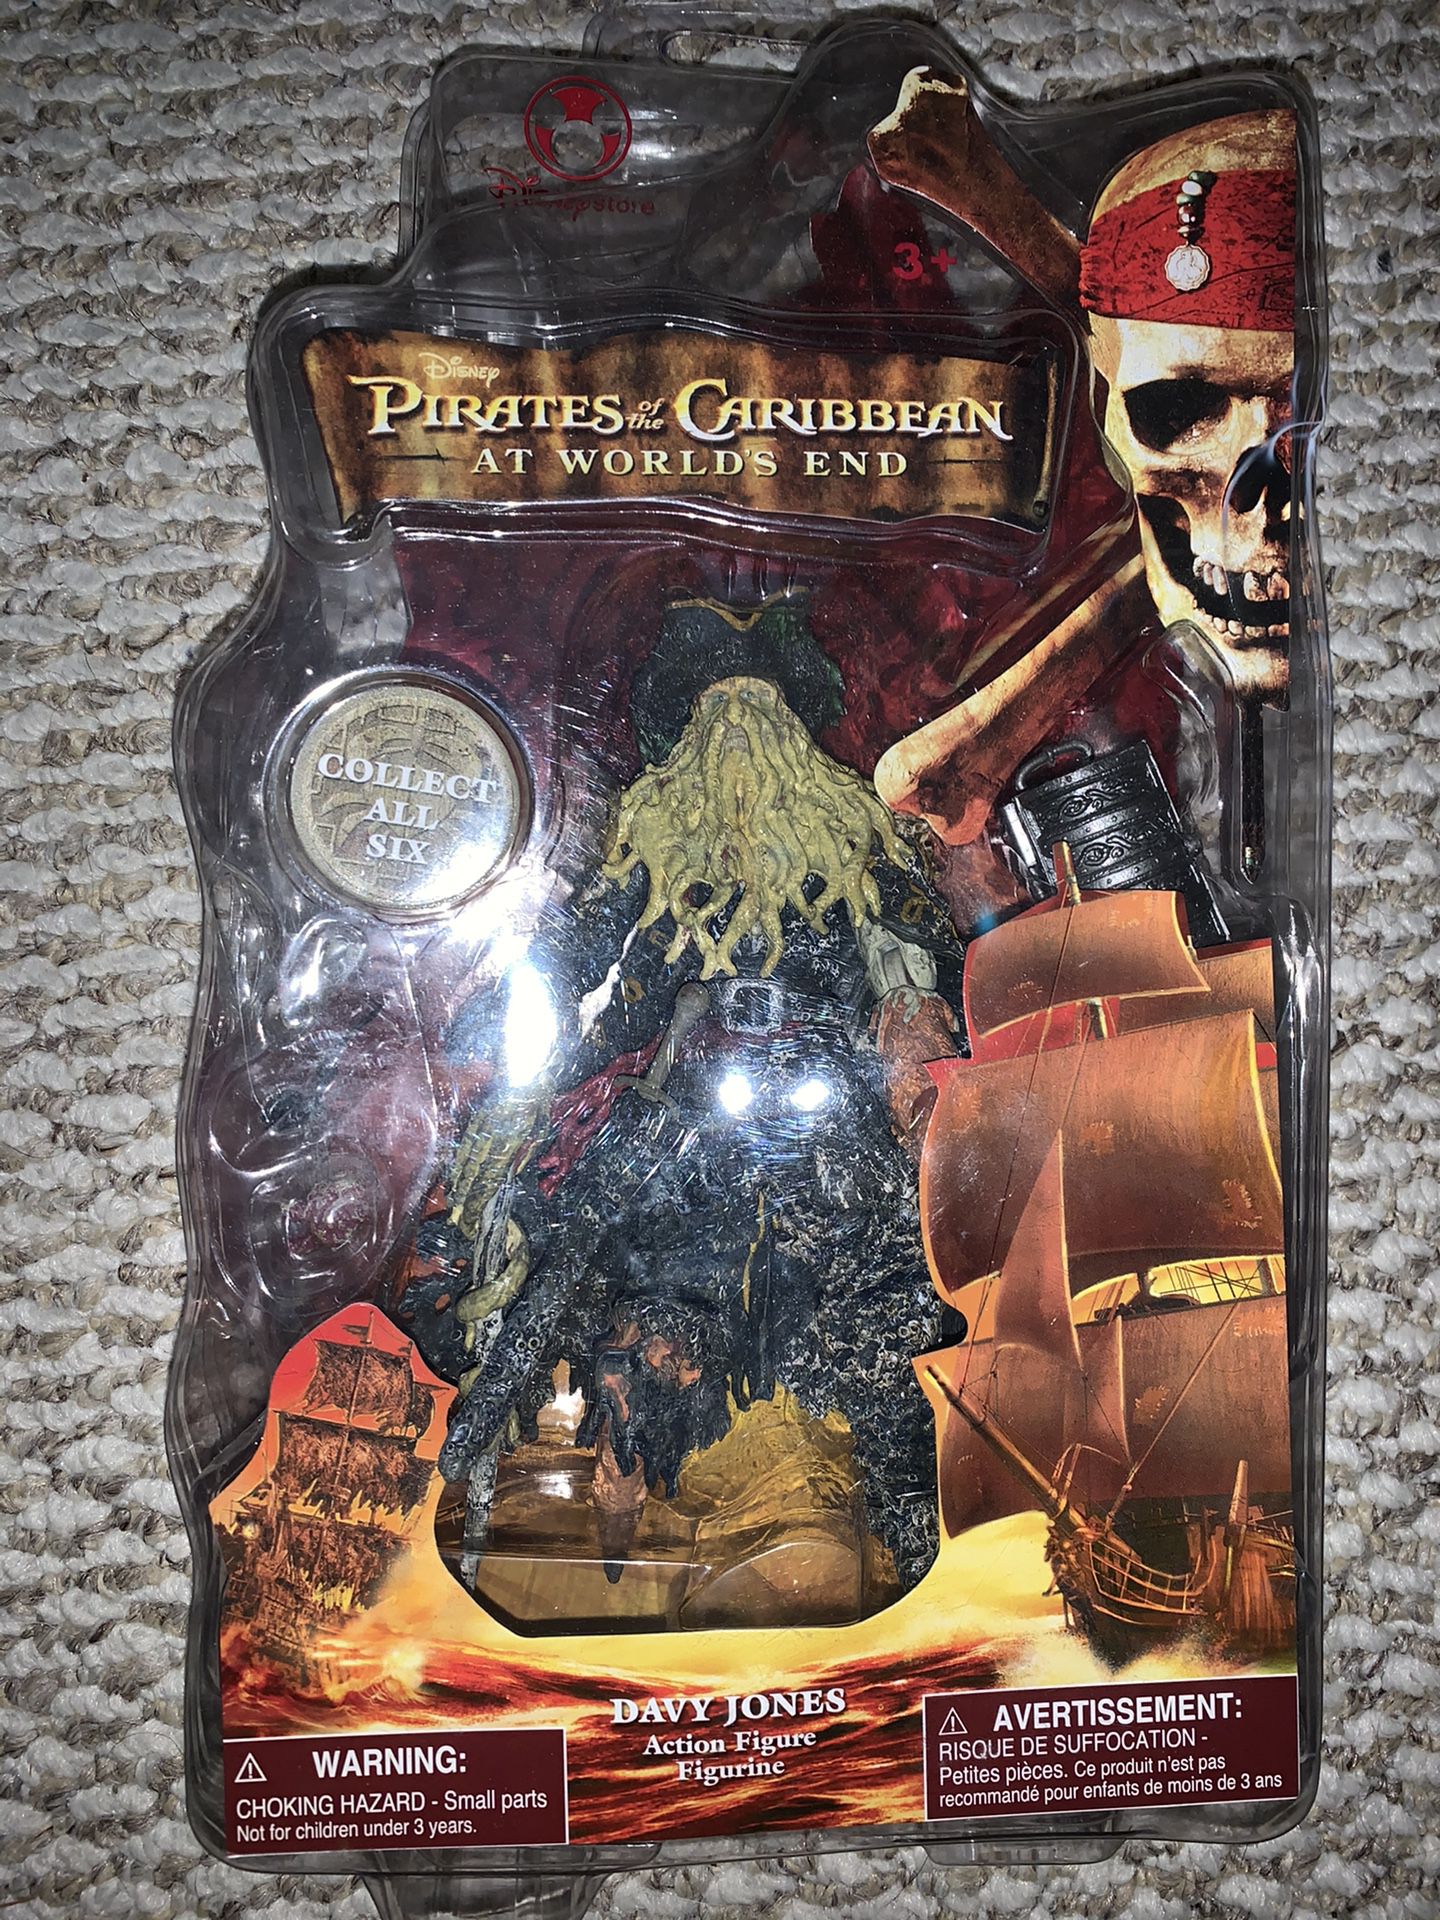 Pirates of the Caribbean: At worlds end; Davy Jones action figure, Disney